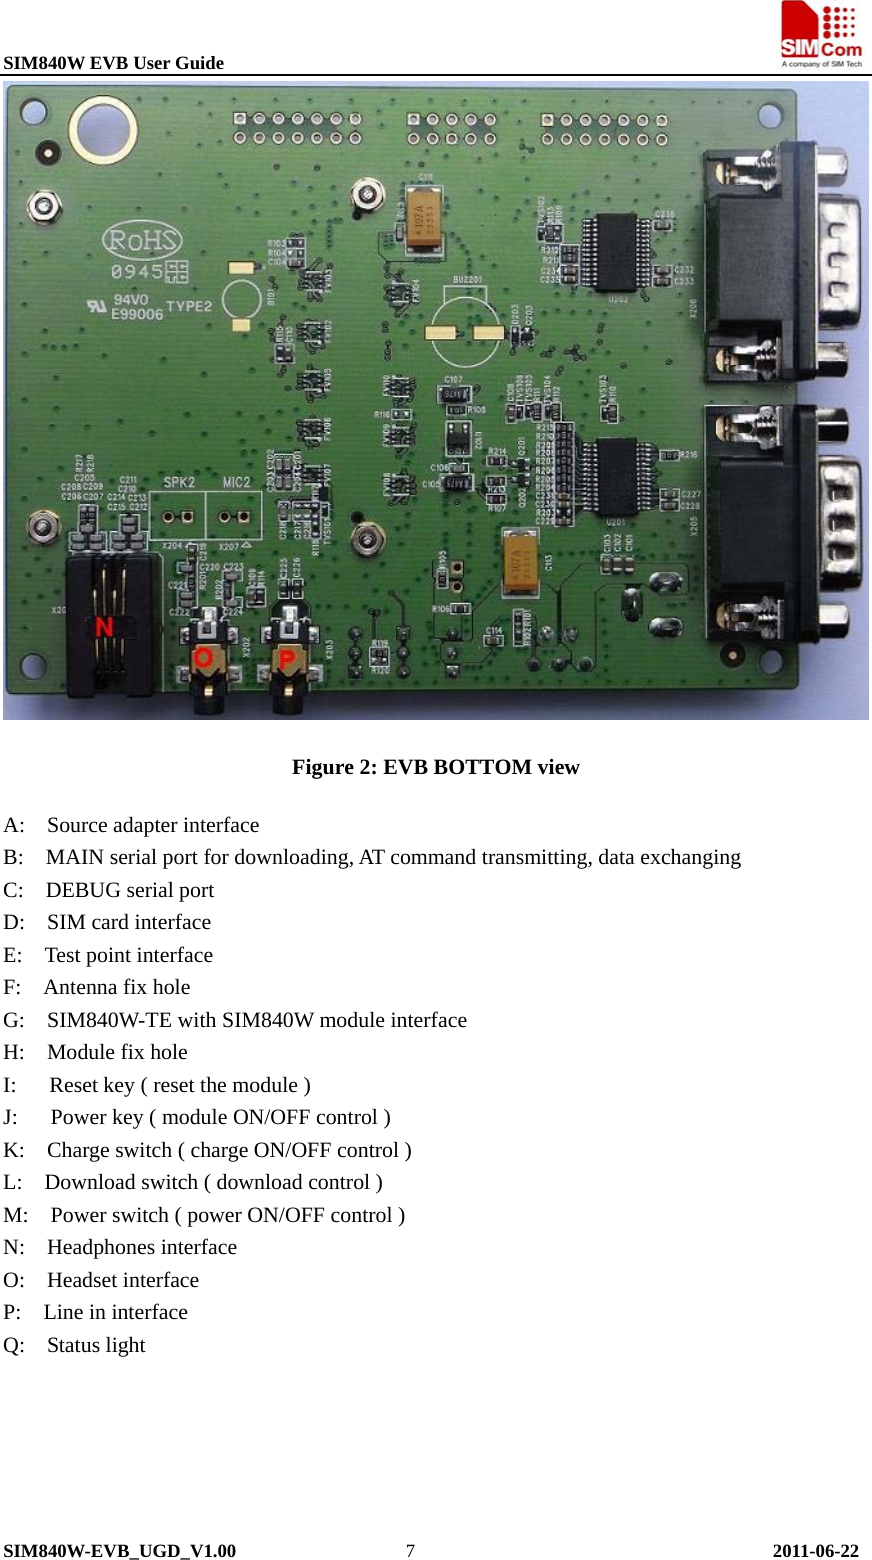 SIM840W EVB User Guide                                                             SIM840W-EVB_UGD_V1.00                  7                                      2011-06-22  Figure 2: EVB BOTTOM view A:  Source adapter interface  B:    MAIN serial port for downloading, AT command transmitting, data exchanging     C:  DEBUG serial port   D:  SIM card interface E:    Test point interface   F:  Antenna fix hole  G:    SIM840W-TE with SIM840W module interface   H:  Module fix hole  I:      Reset key ( reset the module ) J:      Power key ( module ON/OFF control ) K:    Charge switch ( charge ON/OFF control )   L:    Download switch ( download control ) M:    Power switch ( power ON/OFF control ) N:  Headphones interface O:  Headset interface  P:  Line in interface Q:  Status light 